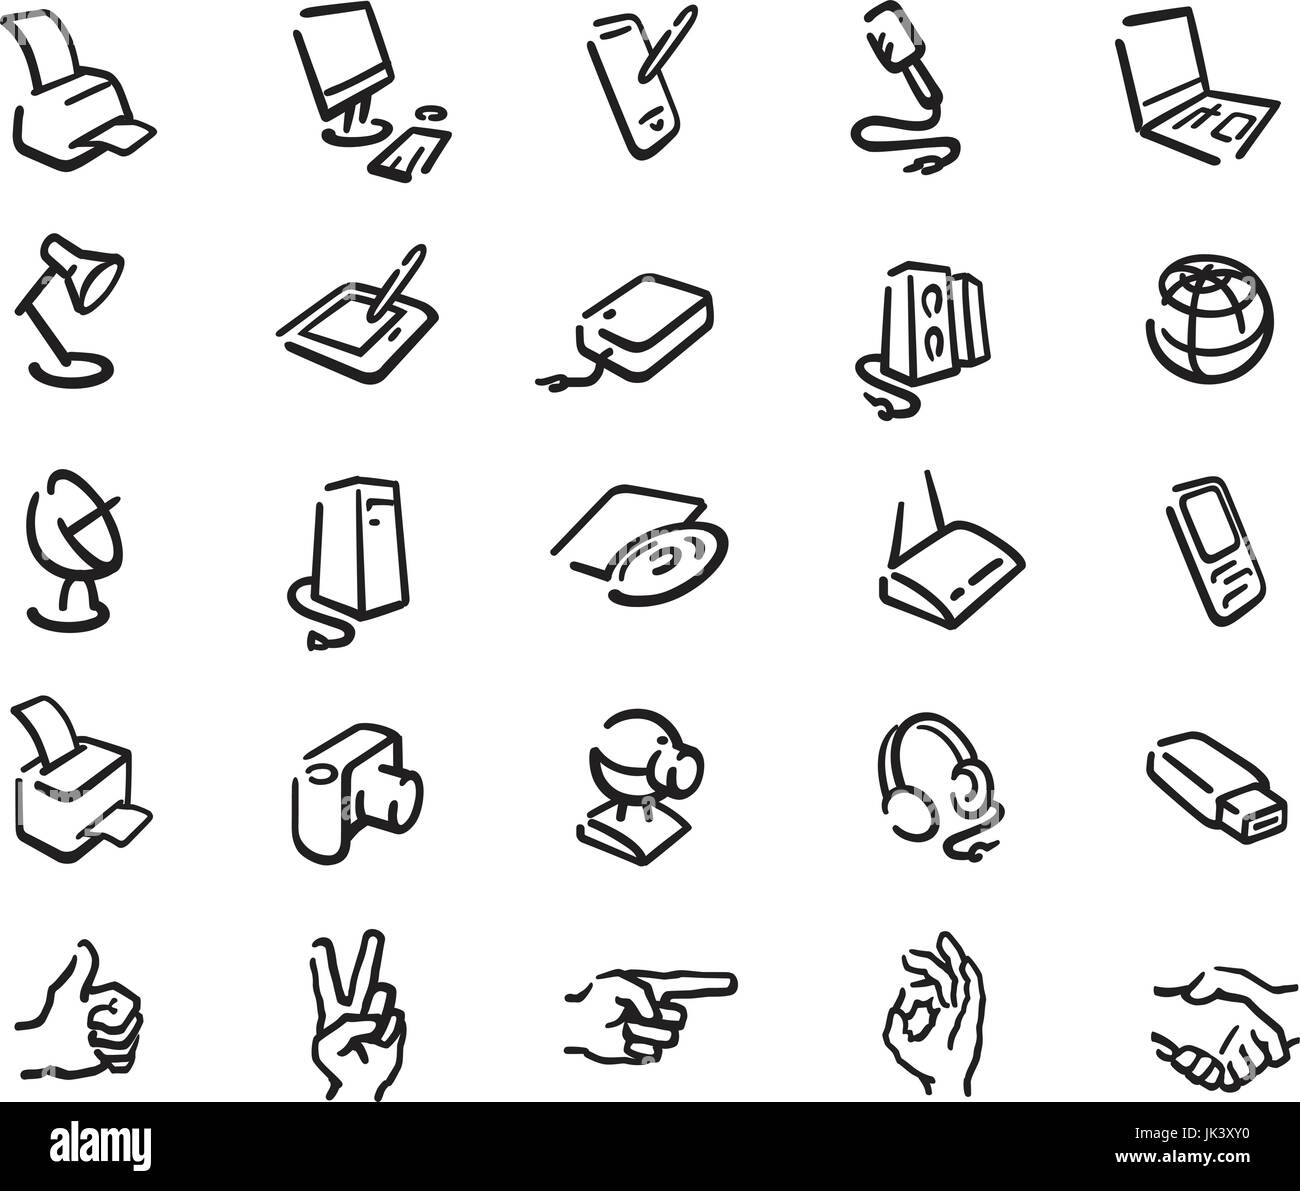 set of outline monochrome icons on theme office equipment Stock Vector